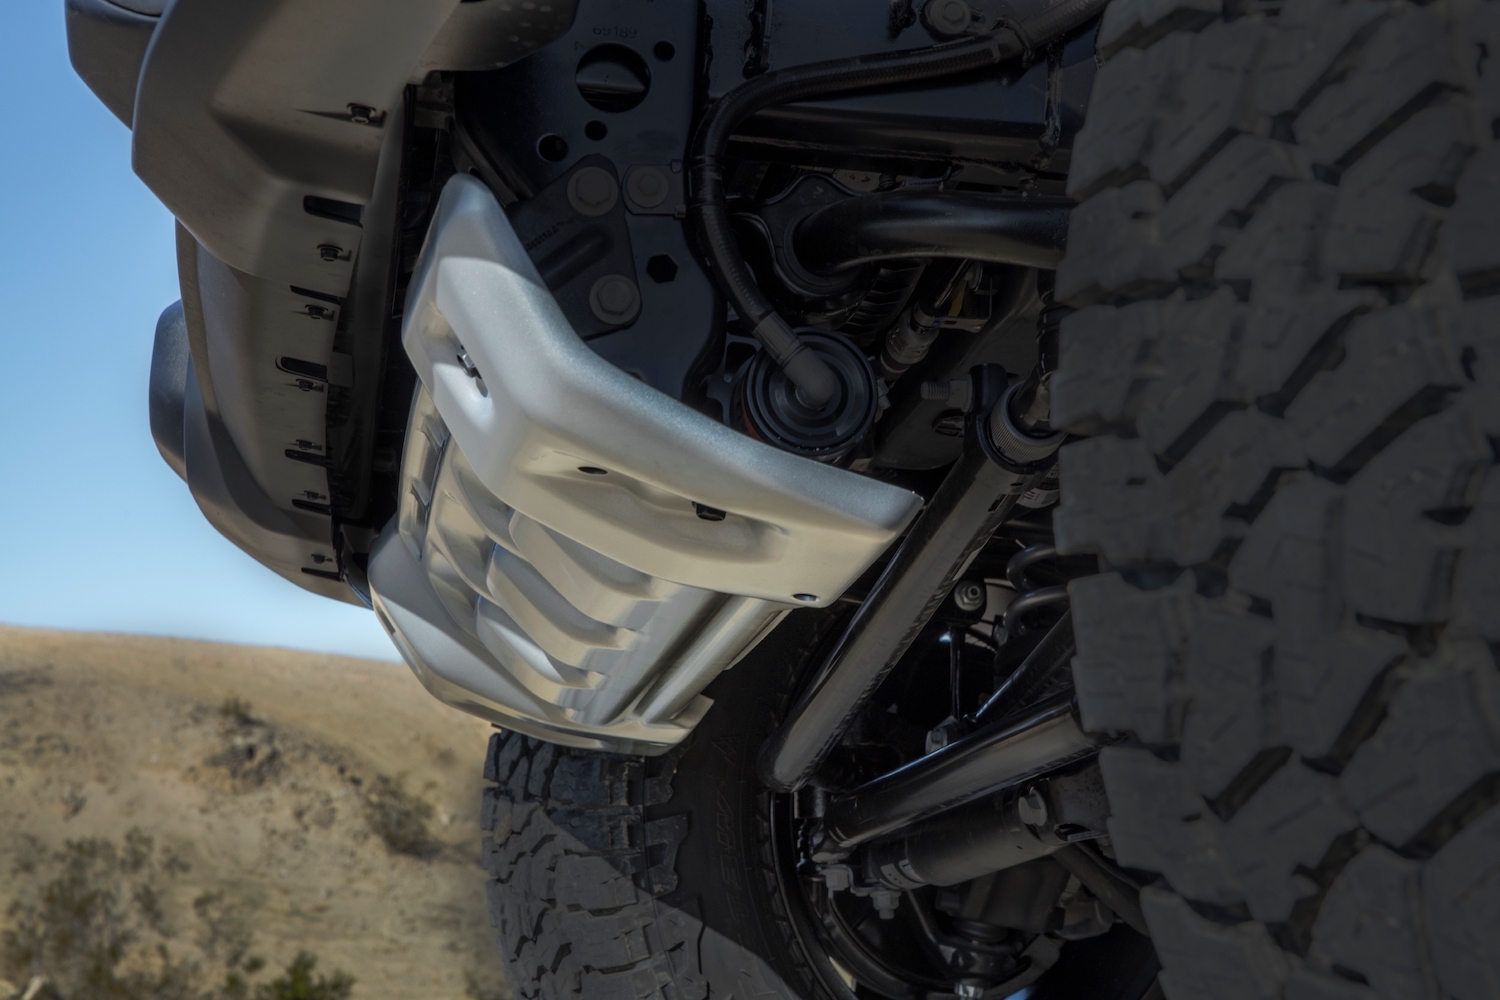 Closeup of a Jeep Gladiator pickup truck's skidplate and solid front axle.